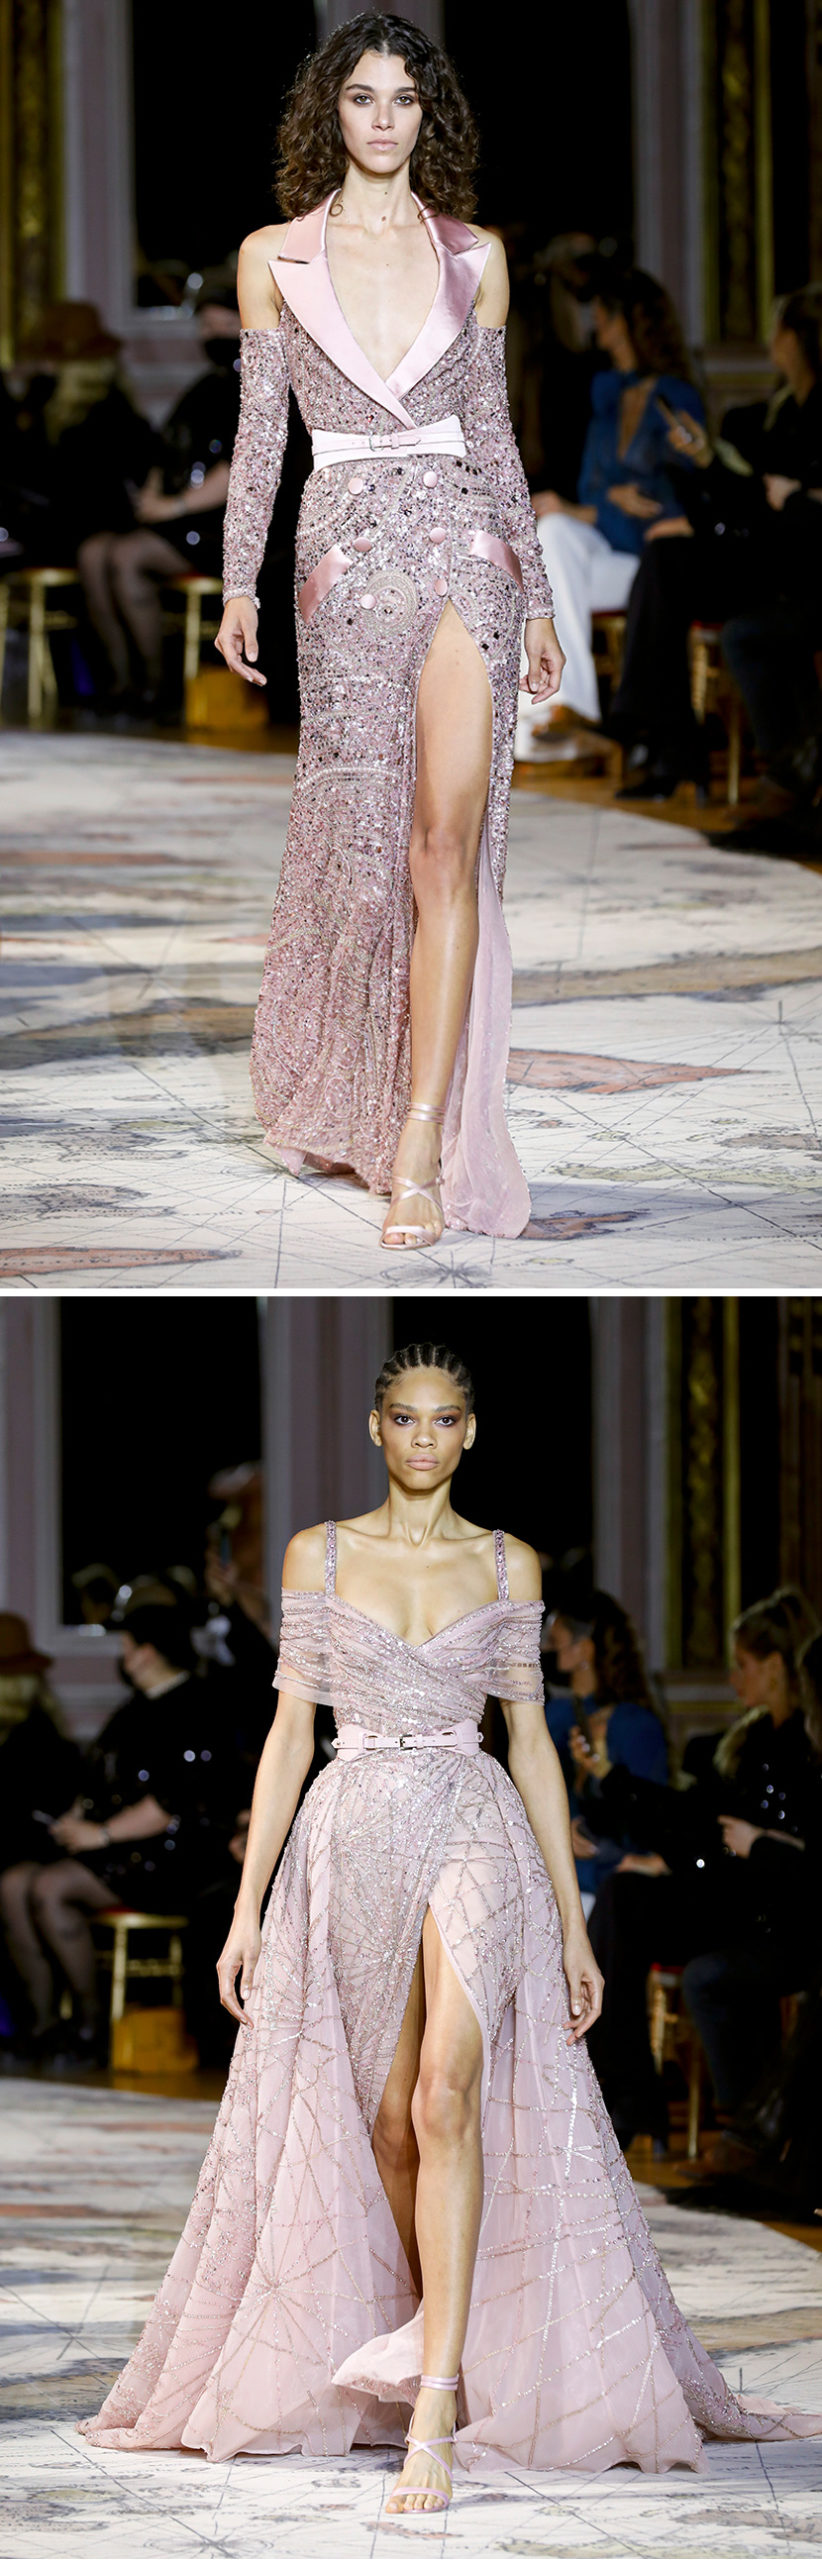 Zuhair Murad Spring Summer 2022 Haute Coutre blush and sand colour dresses